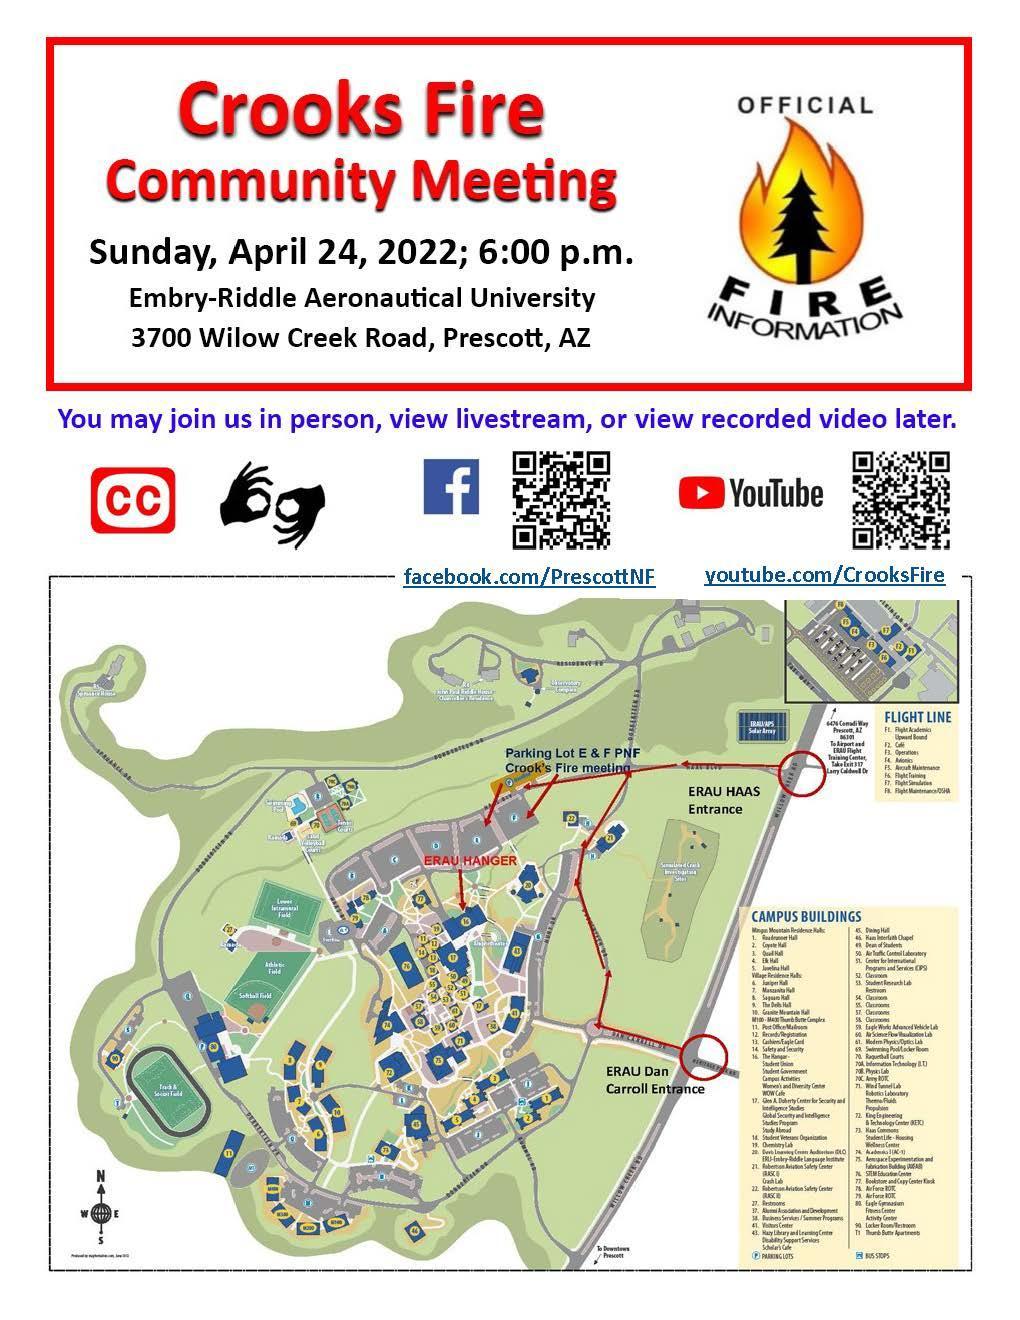 Flyer for Crooks Fire Community Meeting April 24, 2022